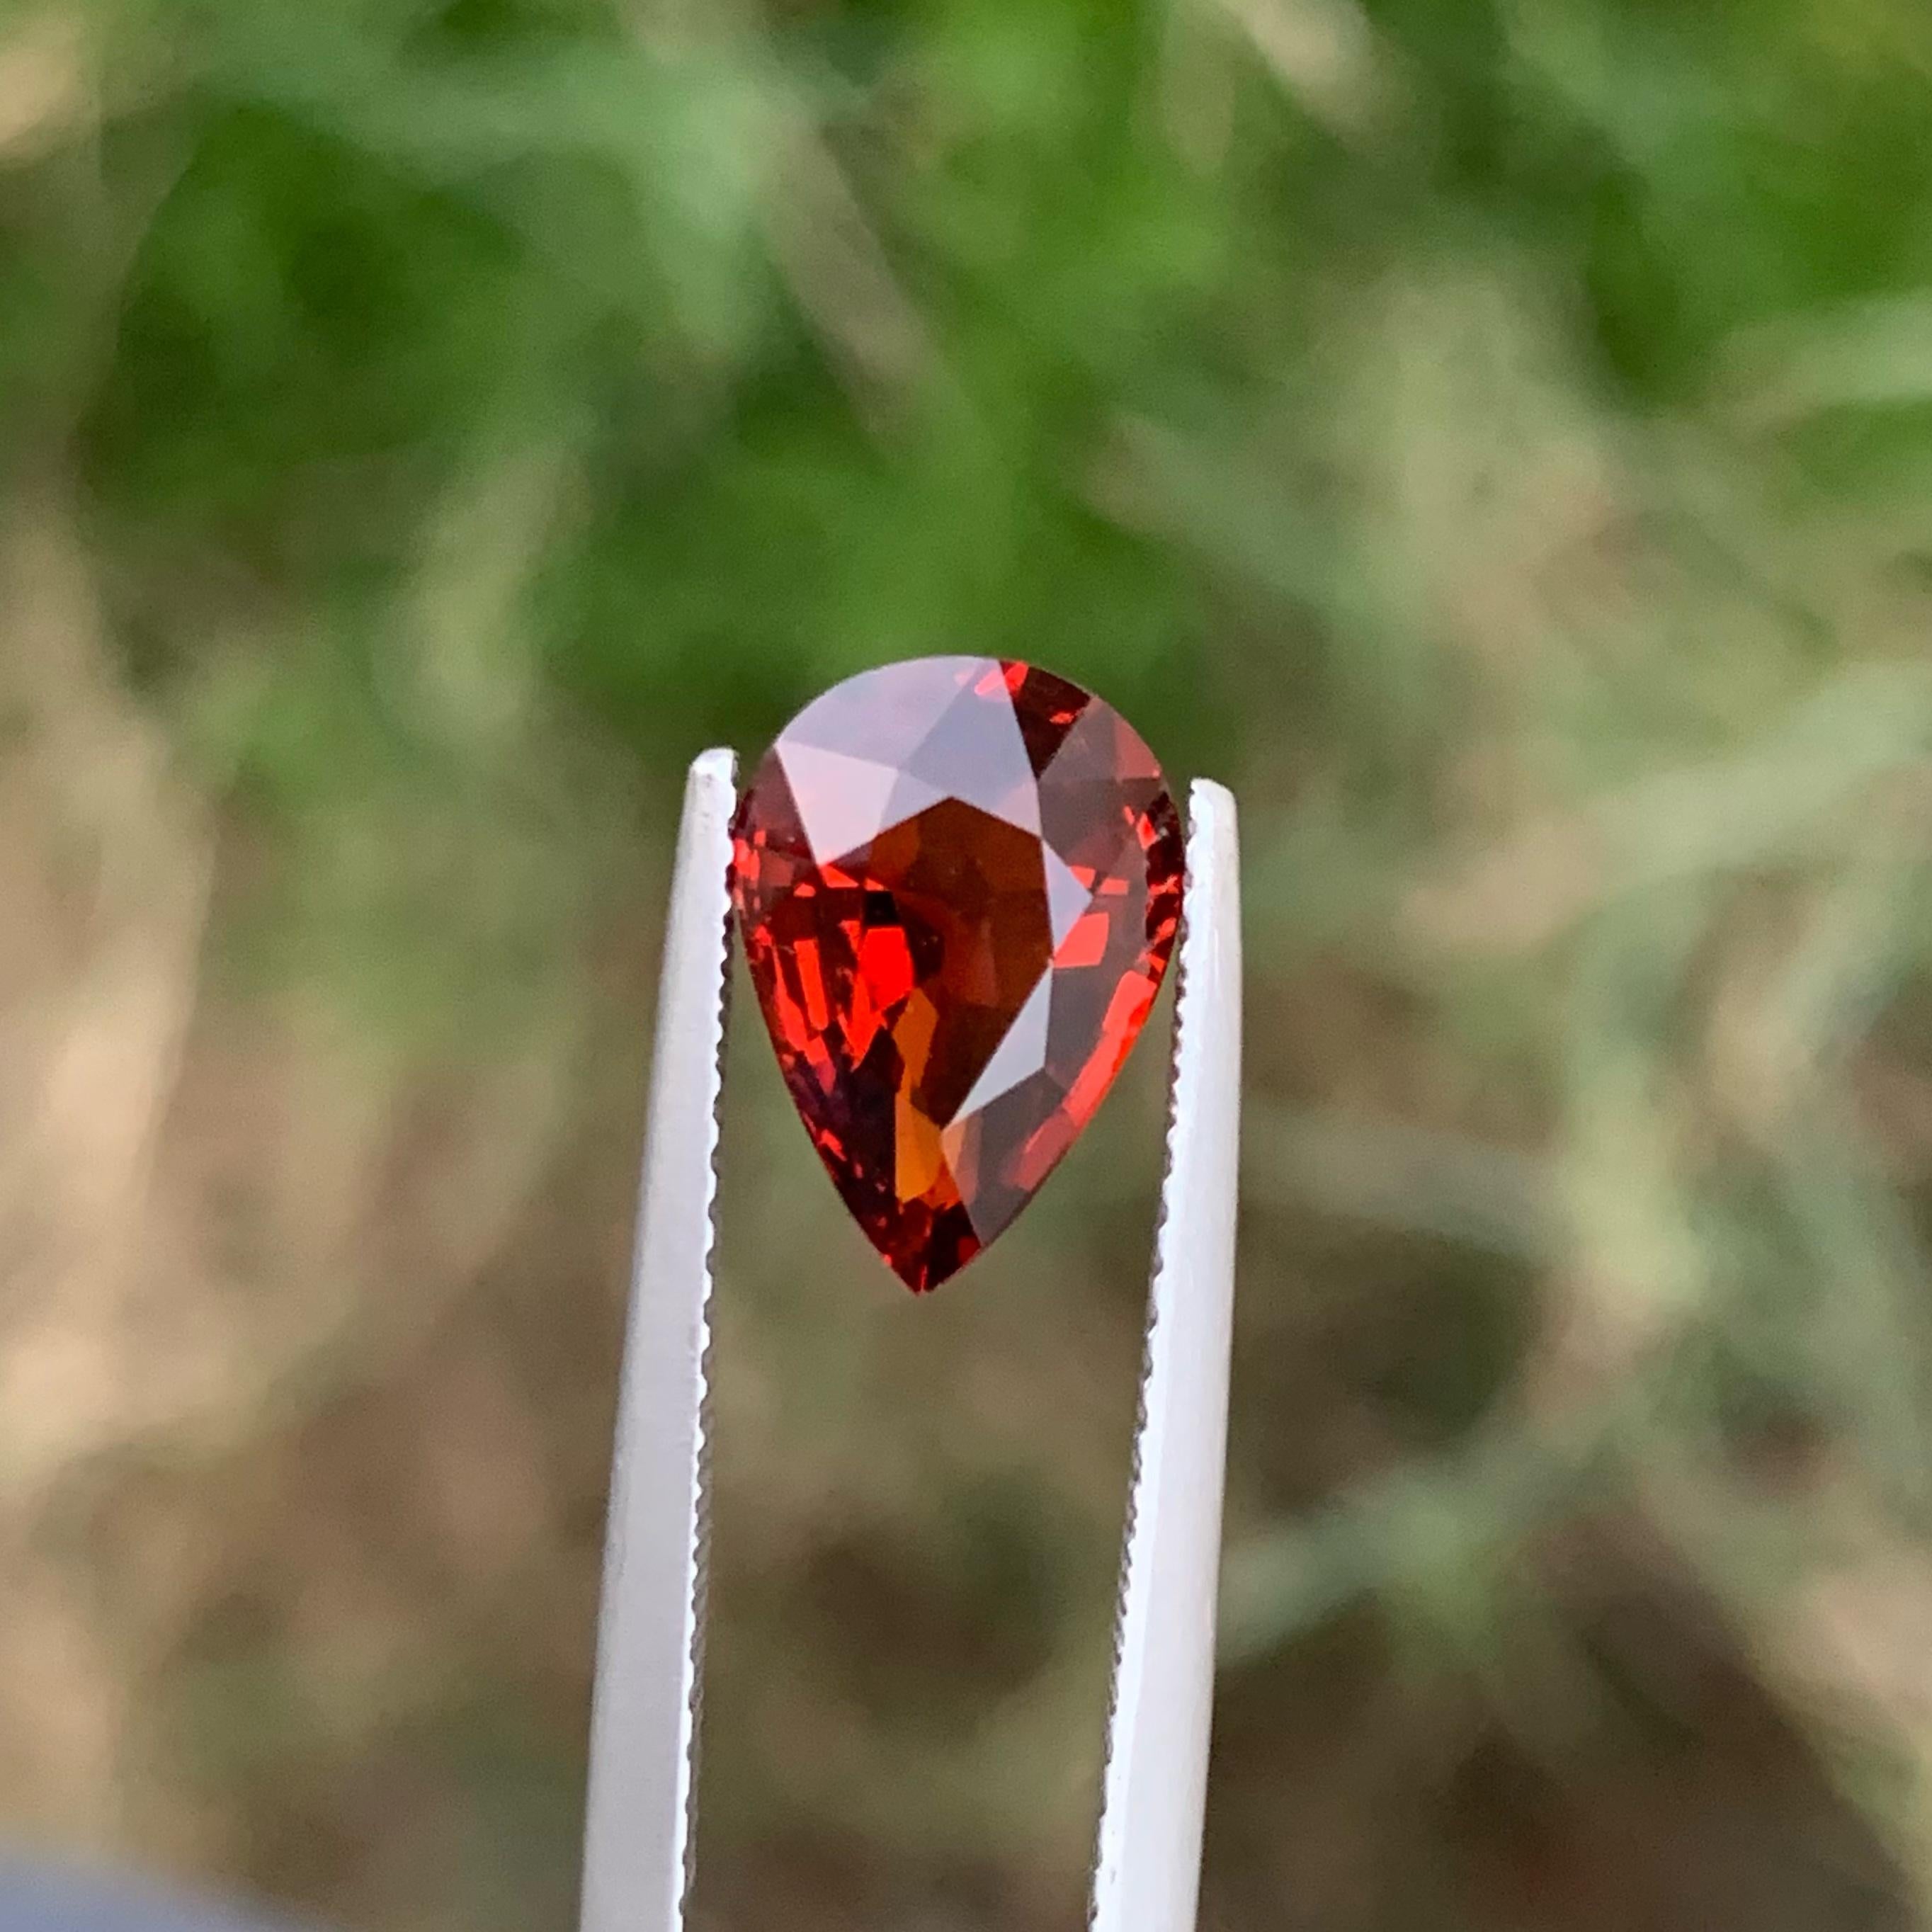 Women's or Men's Garnet Gems for Purchase 3.10 carats Pear Cut Loose Gemstone from Tanzania For Sale